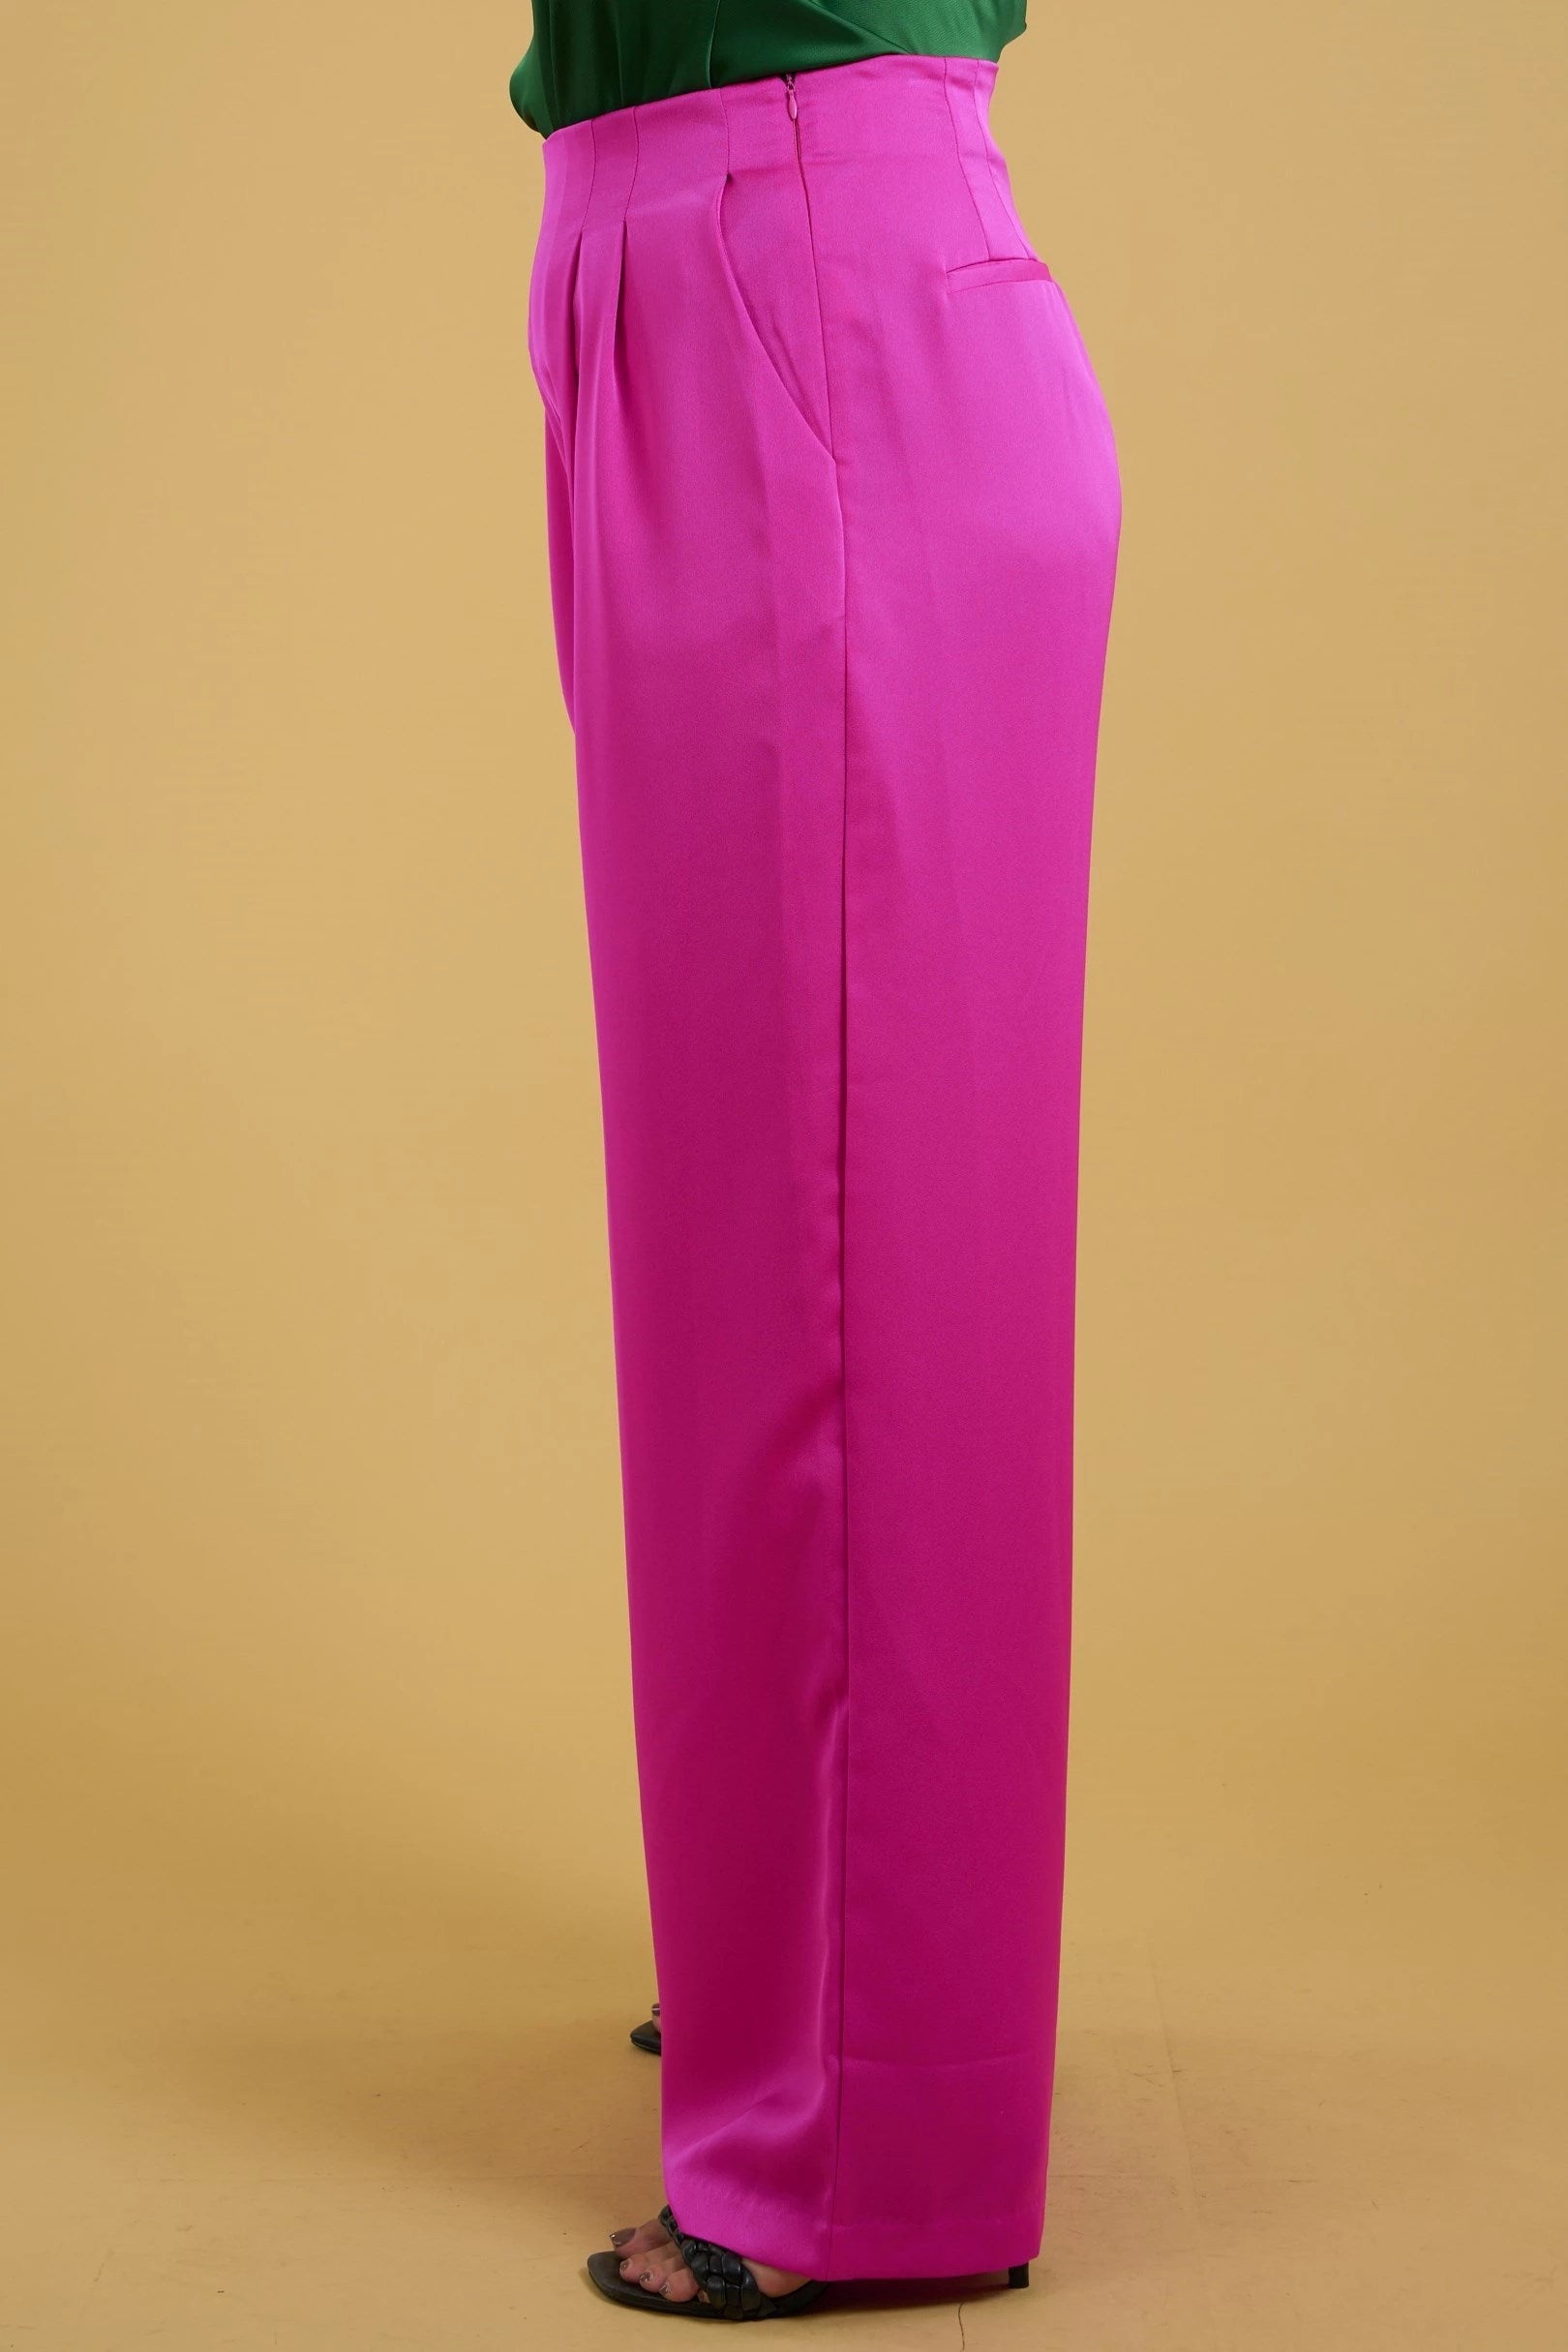 Magenta silky wide leg pants with high waist, side pockets, hidden side zipper, and tailored pleat details. 